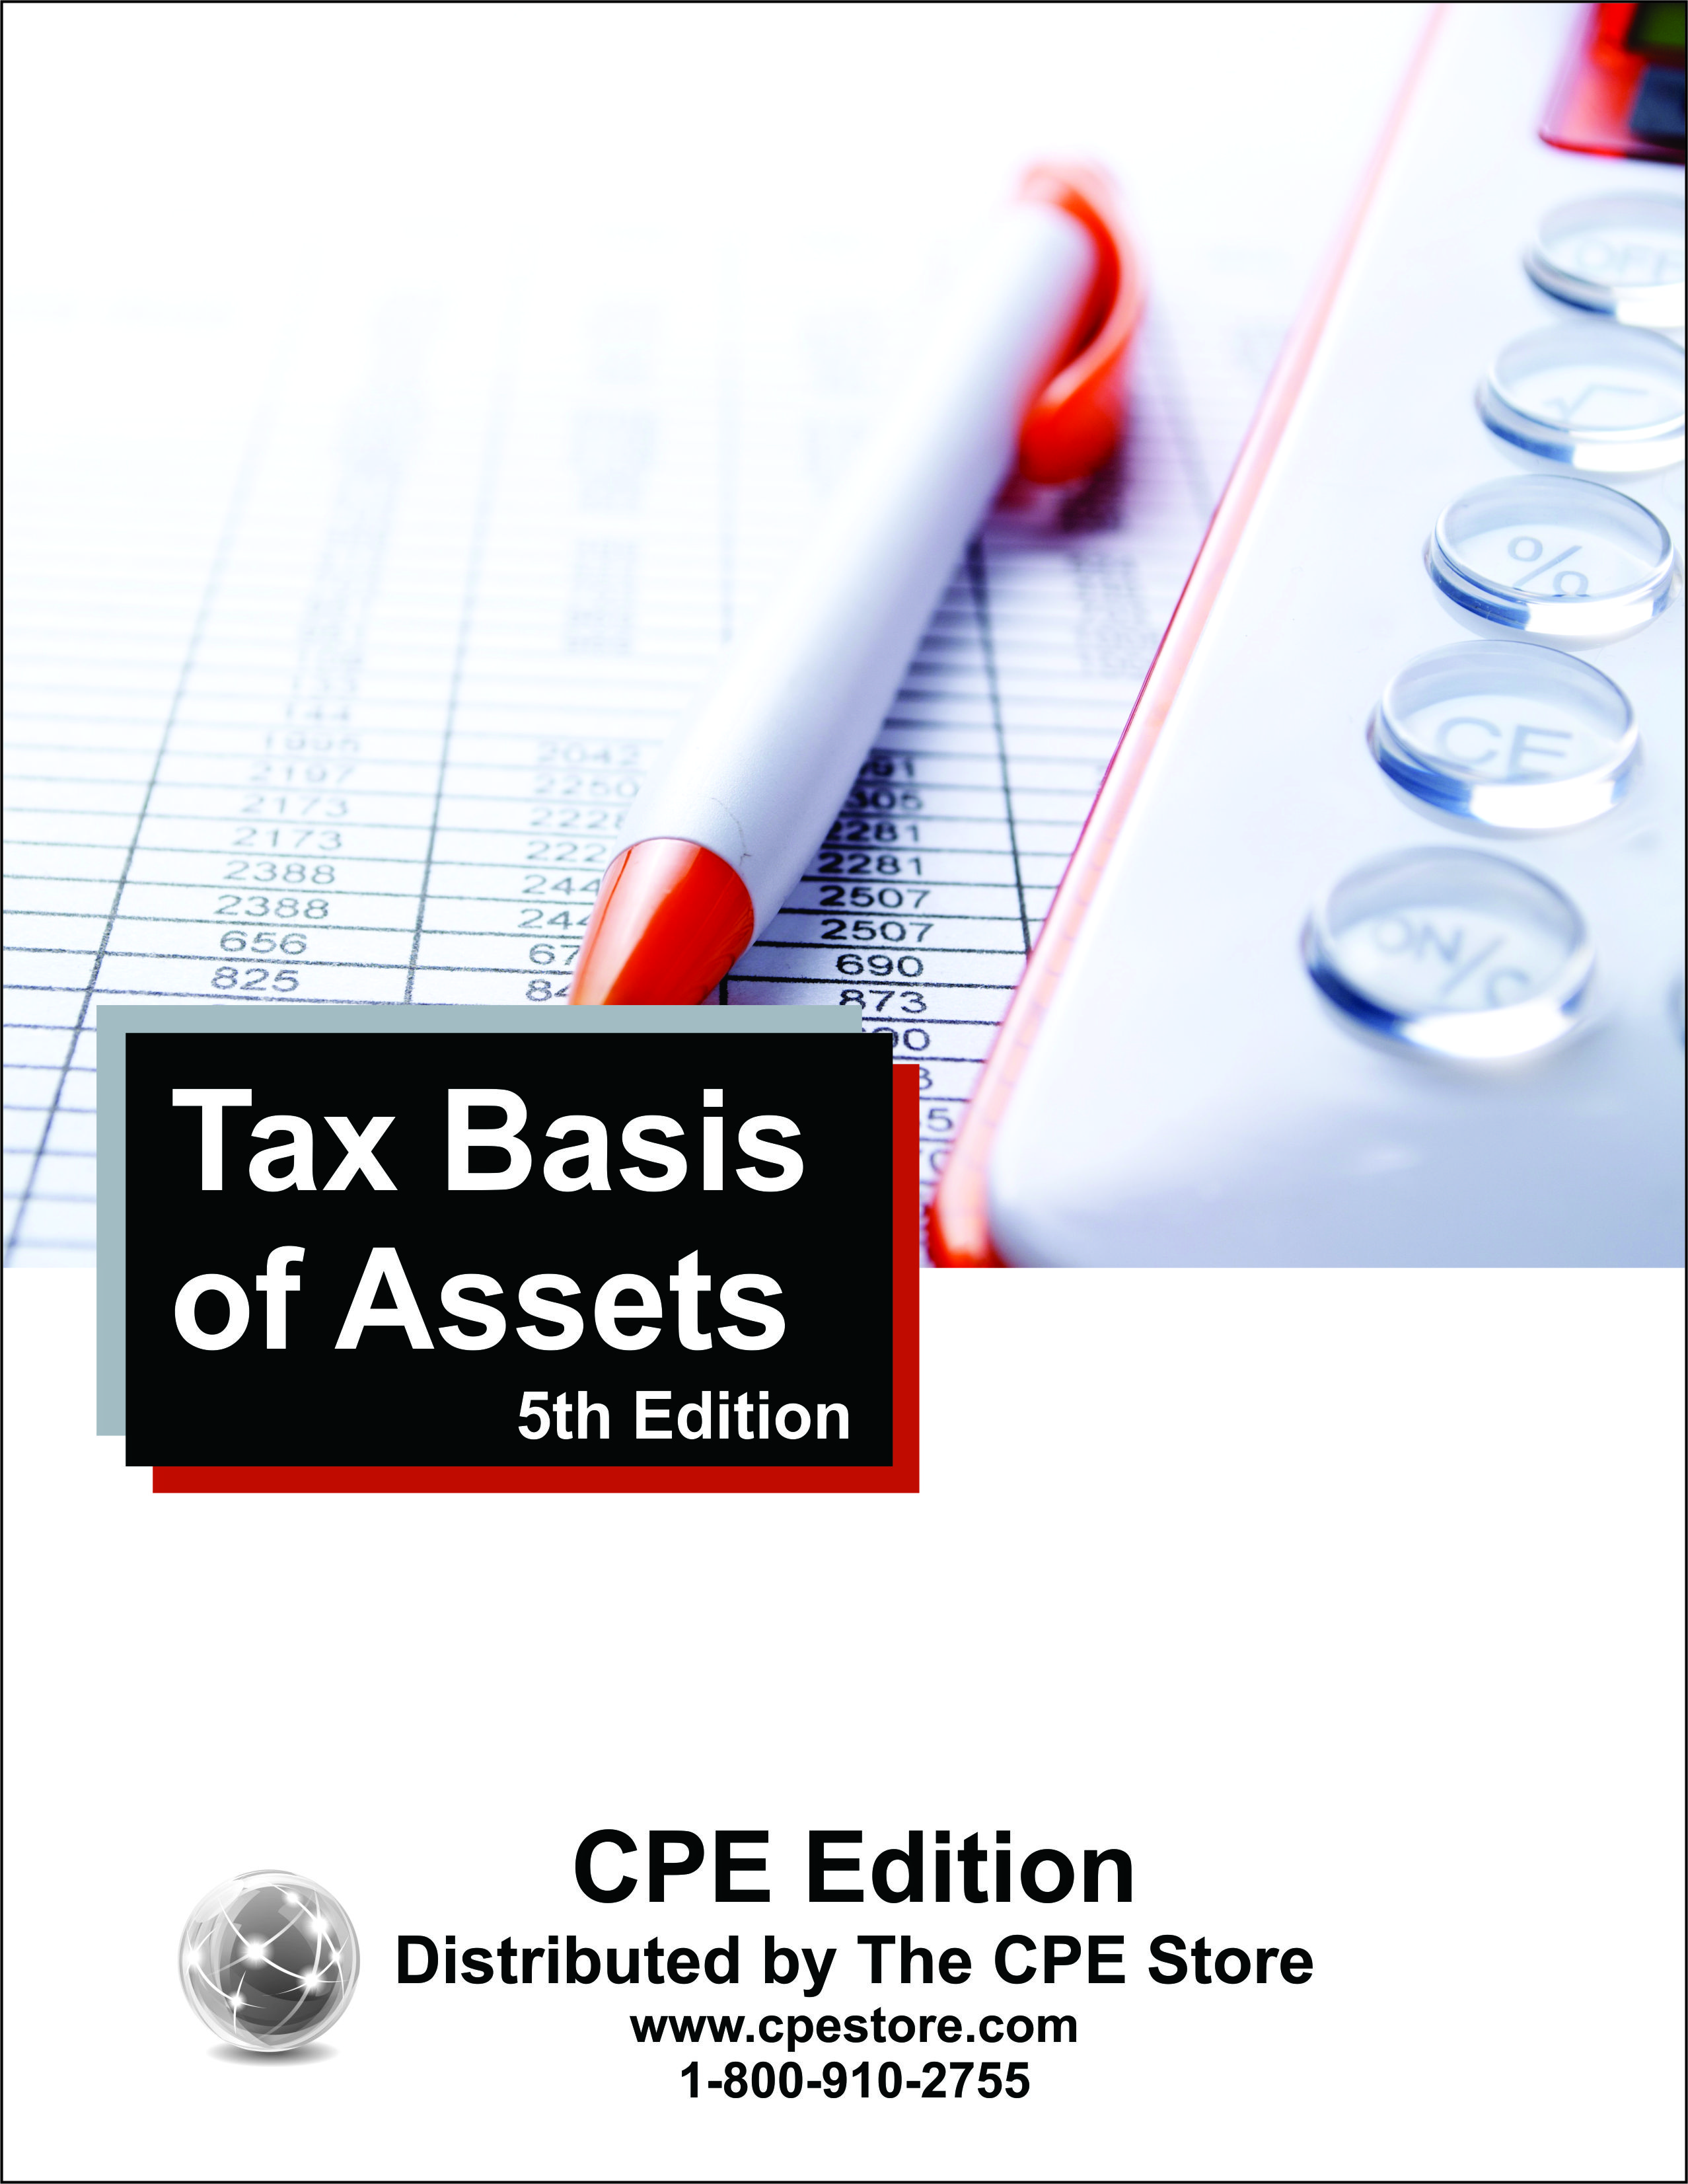 Tax Basis of Assets